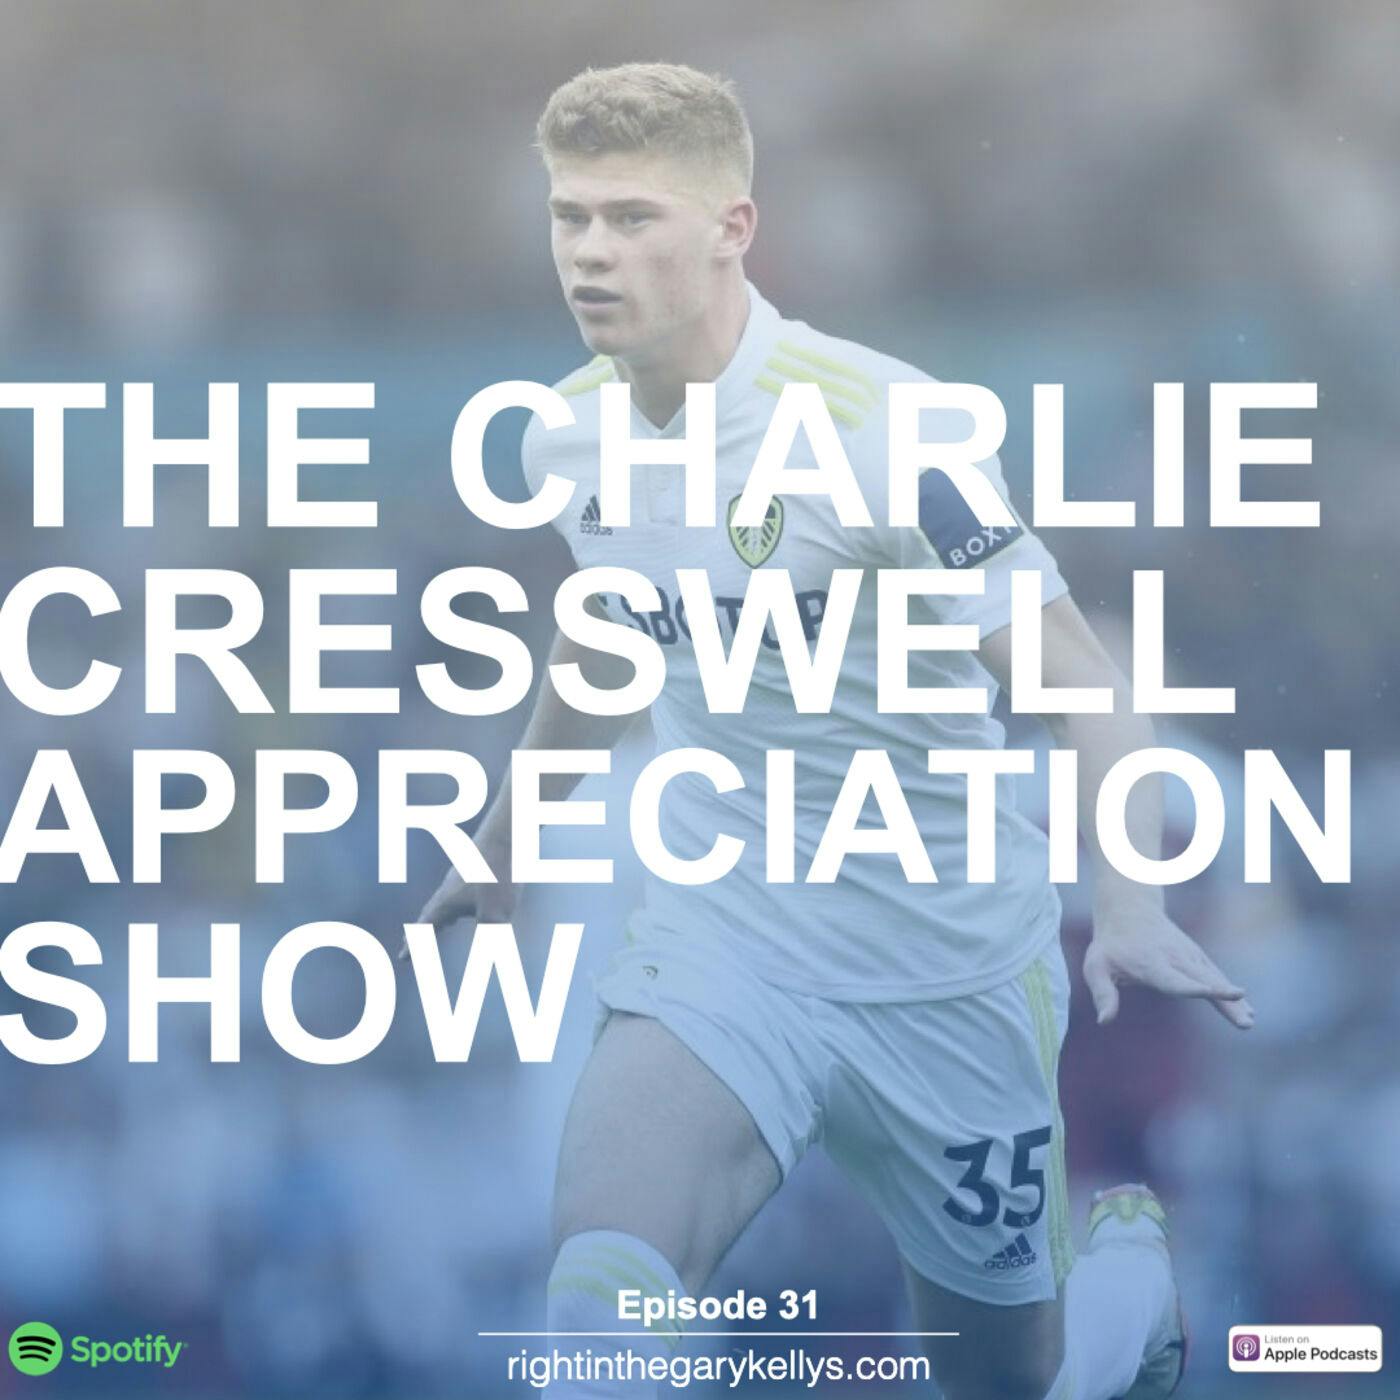 The Charlie Cresswell Appreciation Show